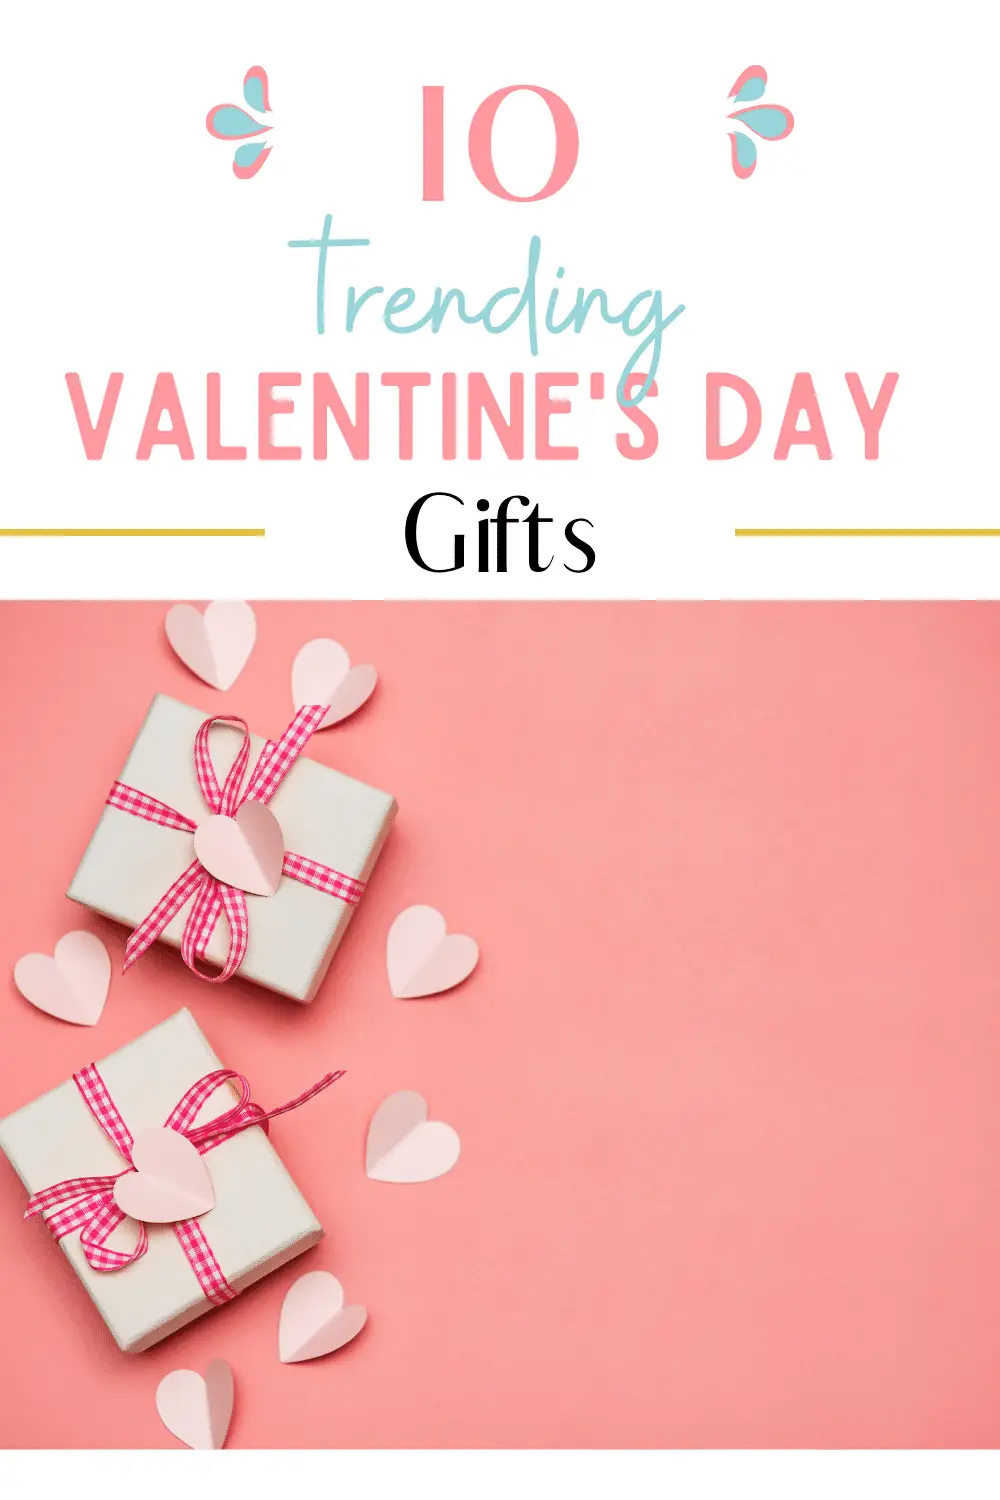 Trending Valentine's Day Gifts